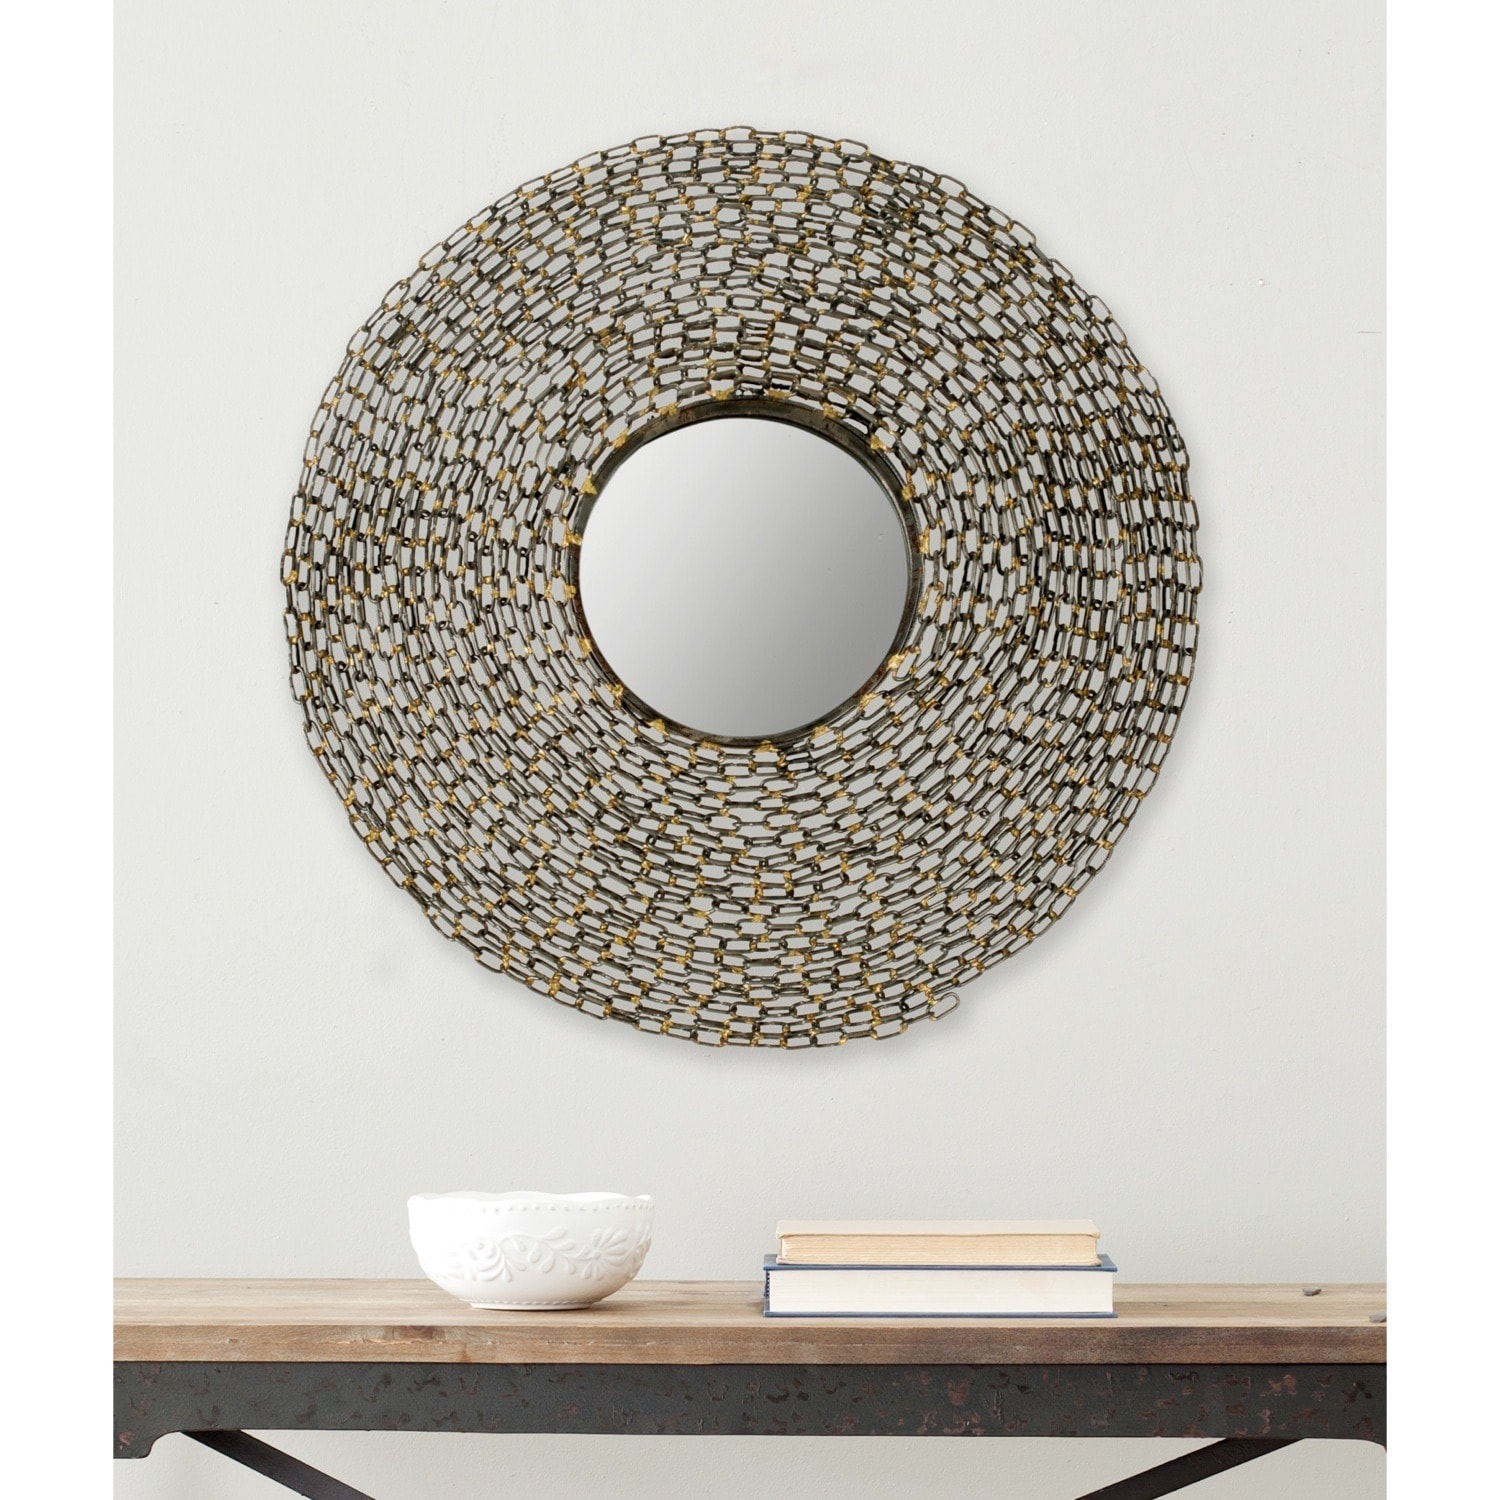 Natural Mirror Today $149.99 Sale $134.99 Save 10%